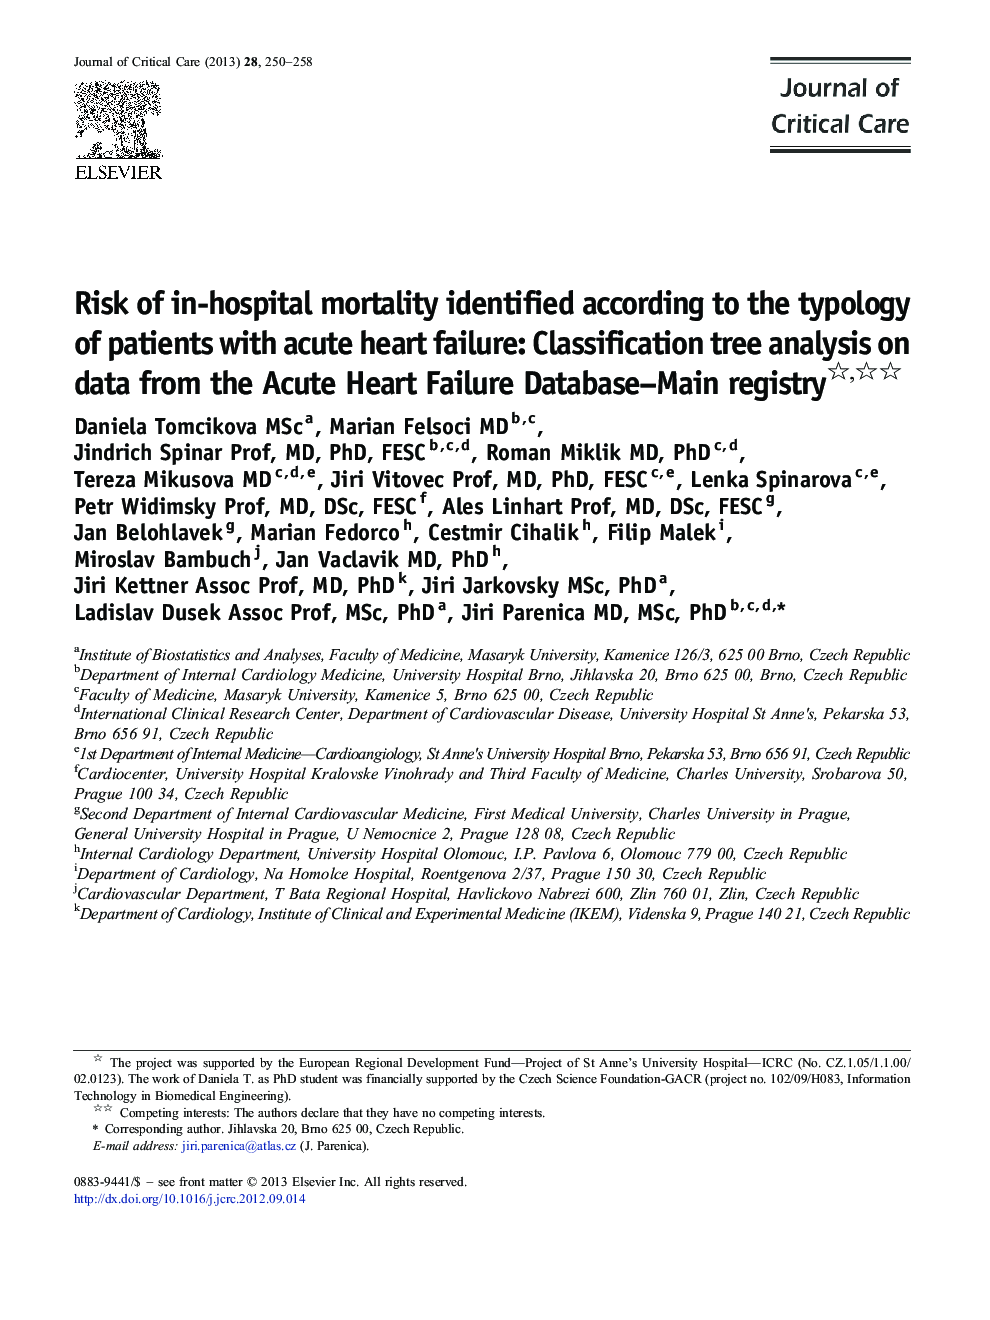 Risk of in-hospital mortality identified according to the typology of patients with acute heart failure: Classification tree analysis on data from the Acute Heart Failure Database–Main registry 